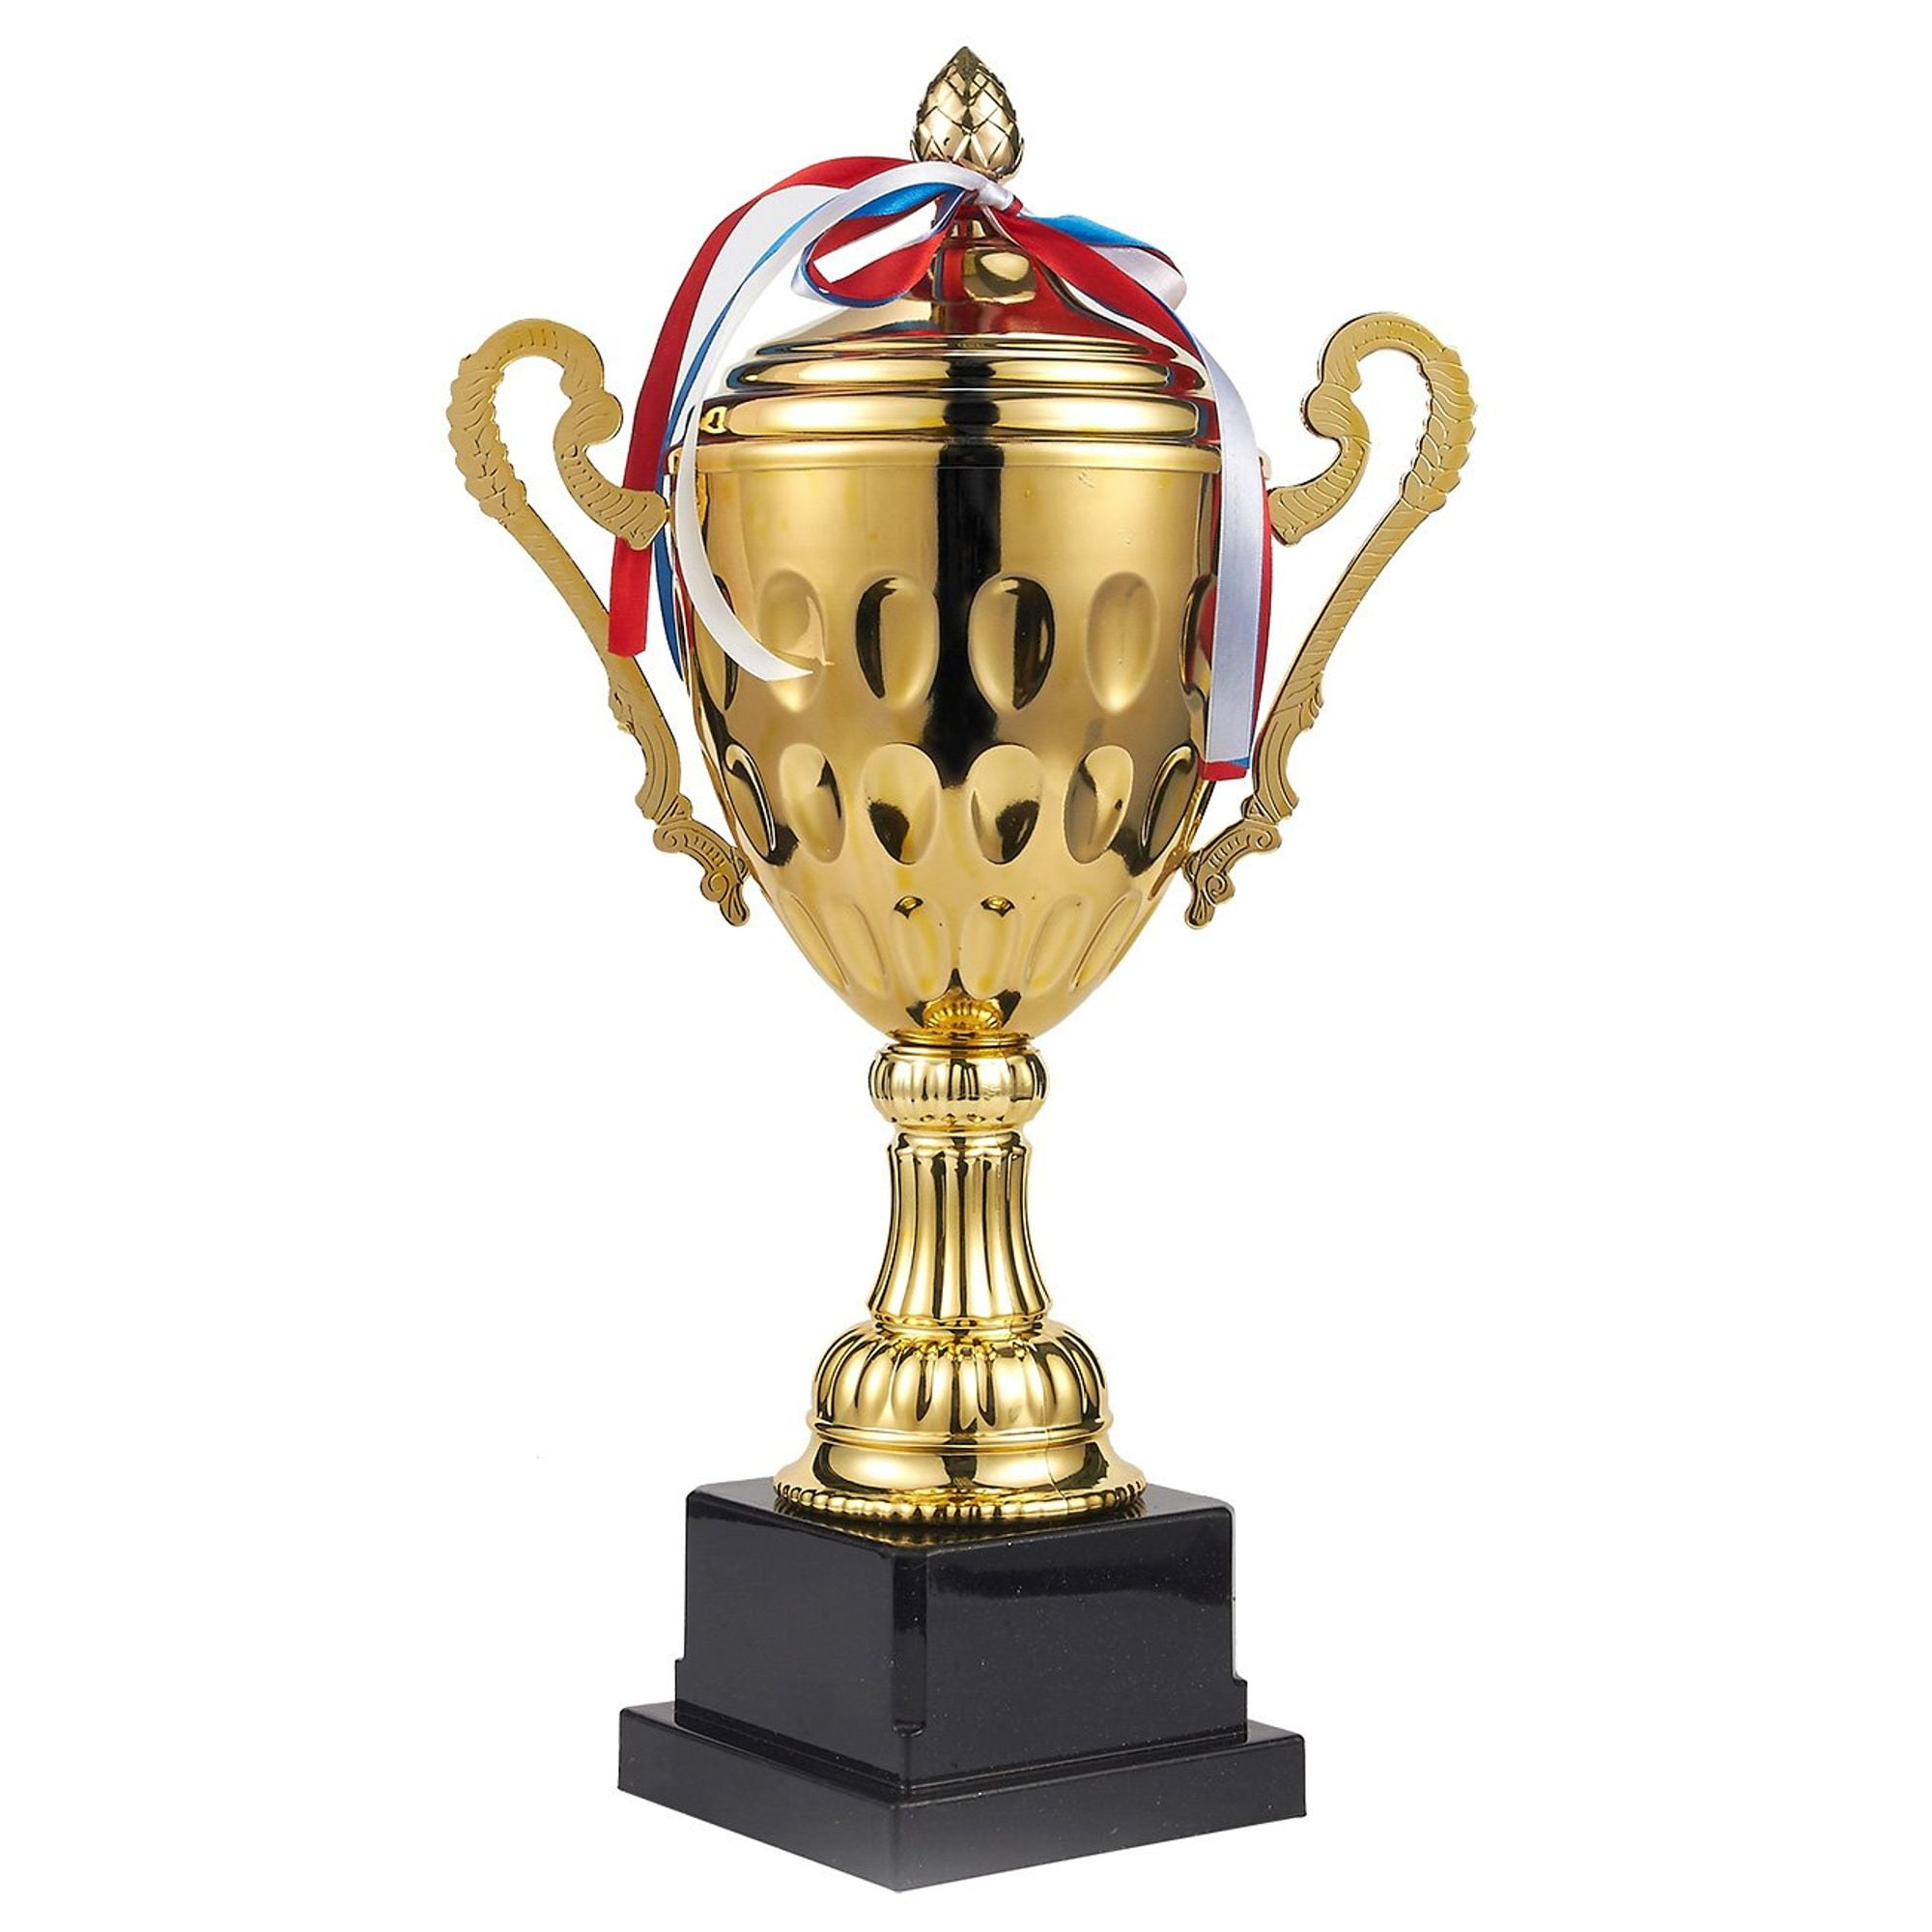 Trophy Cup - Large Trophy, Gold Award for Sports, Tournaments